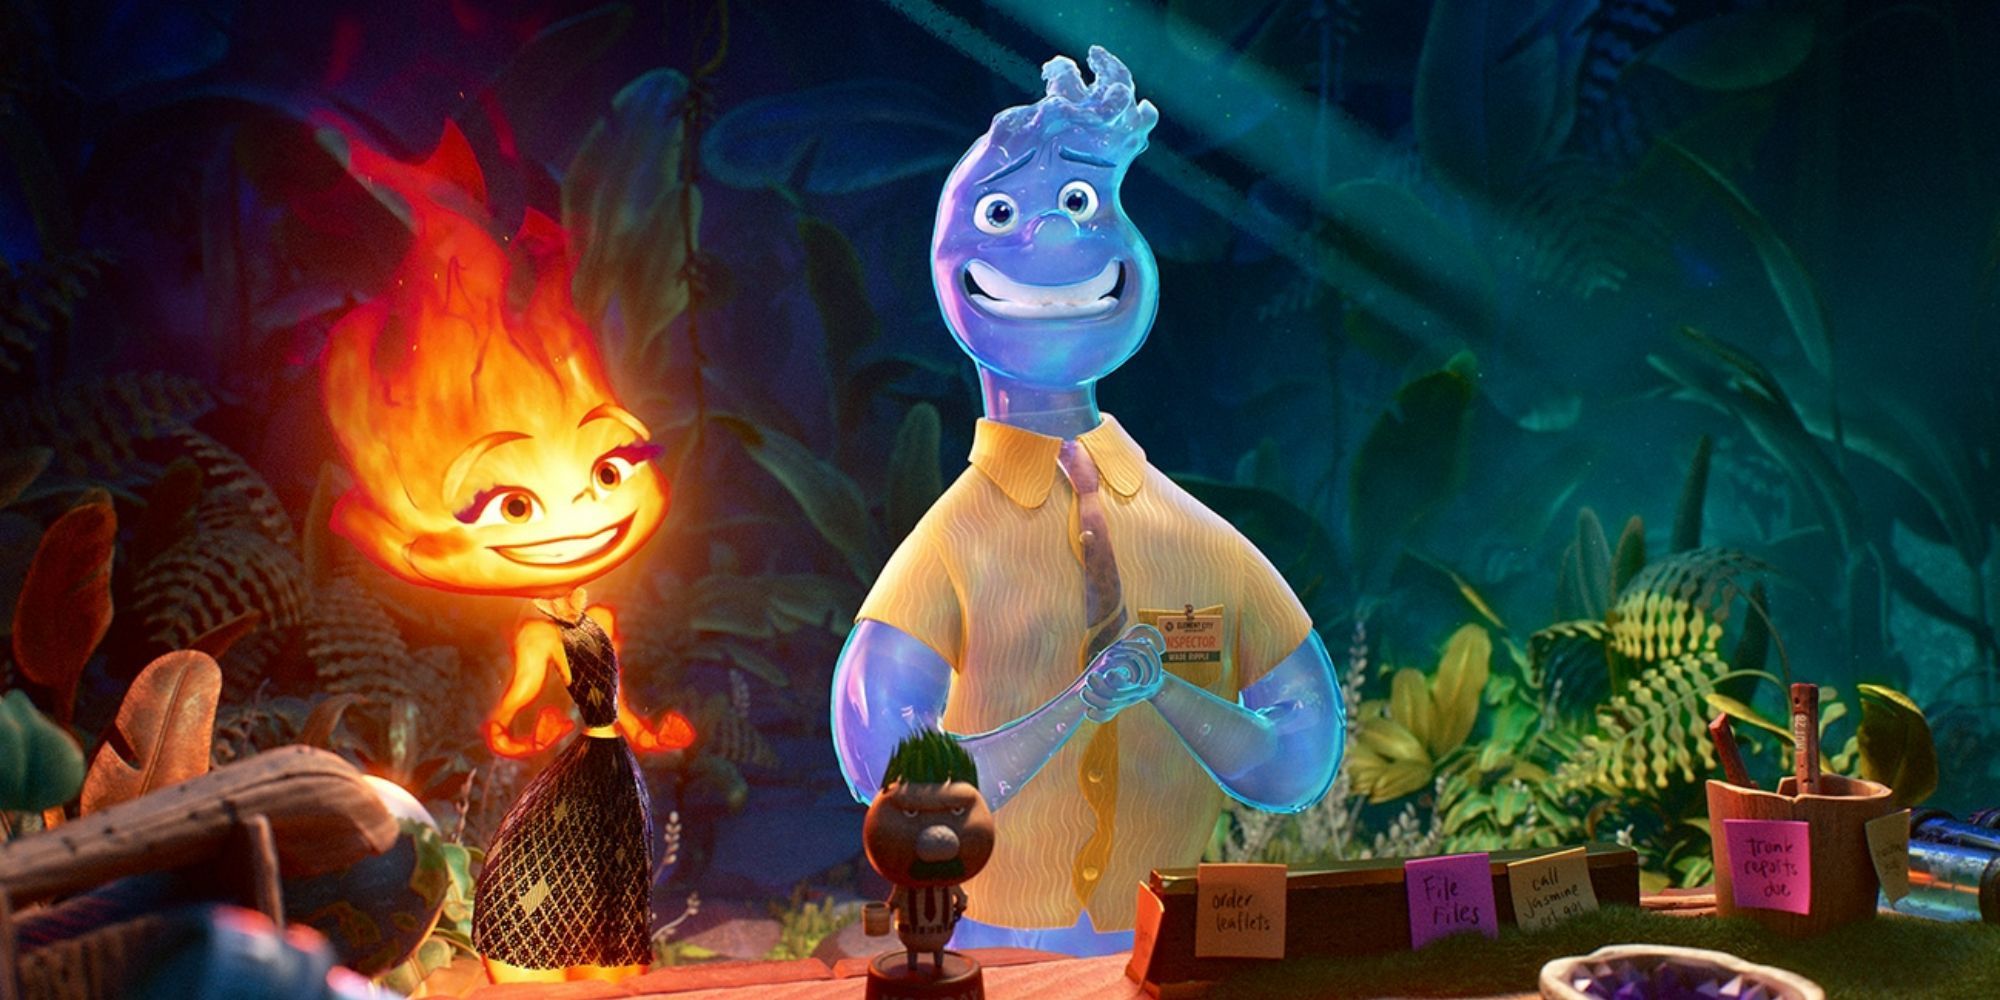 Fire and water in Pixar's Elemental